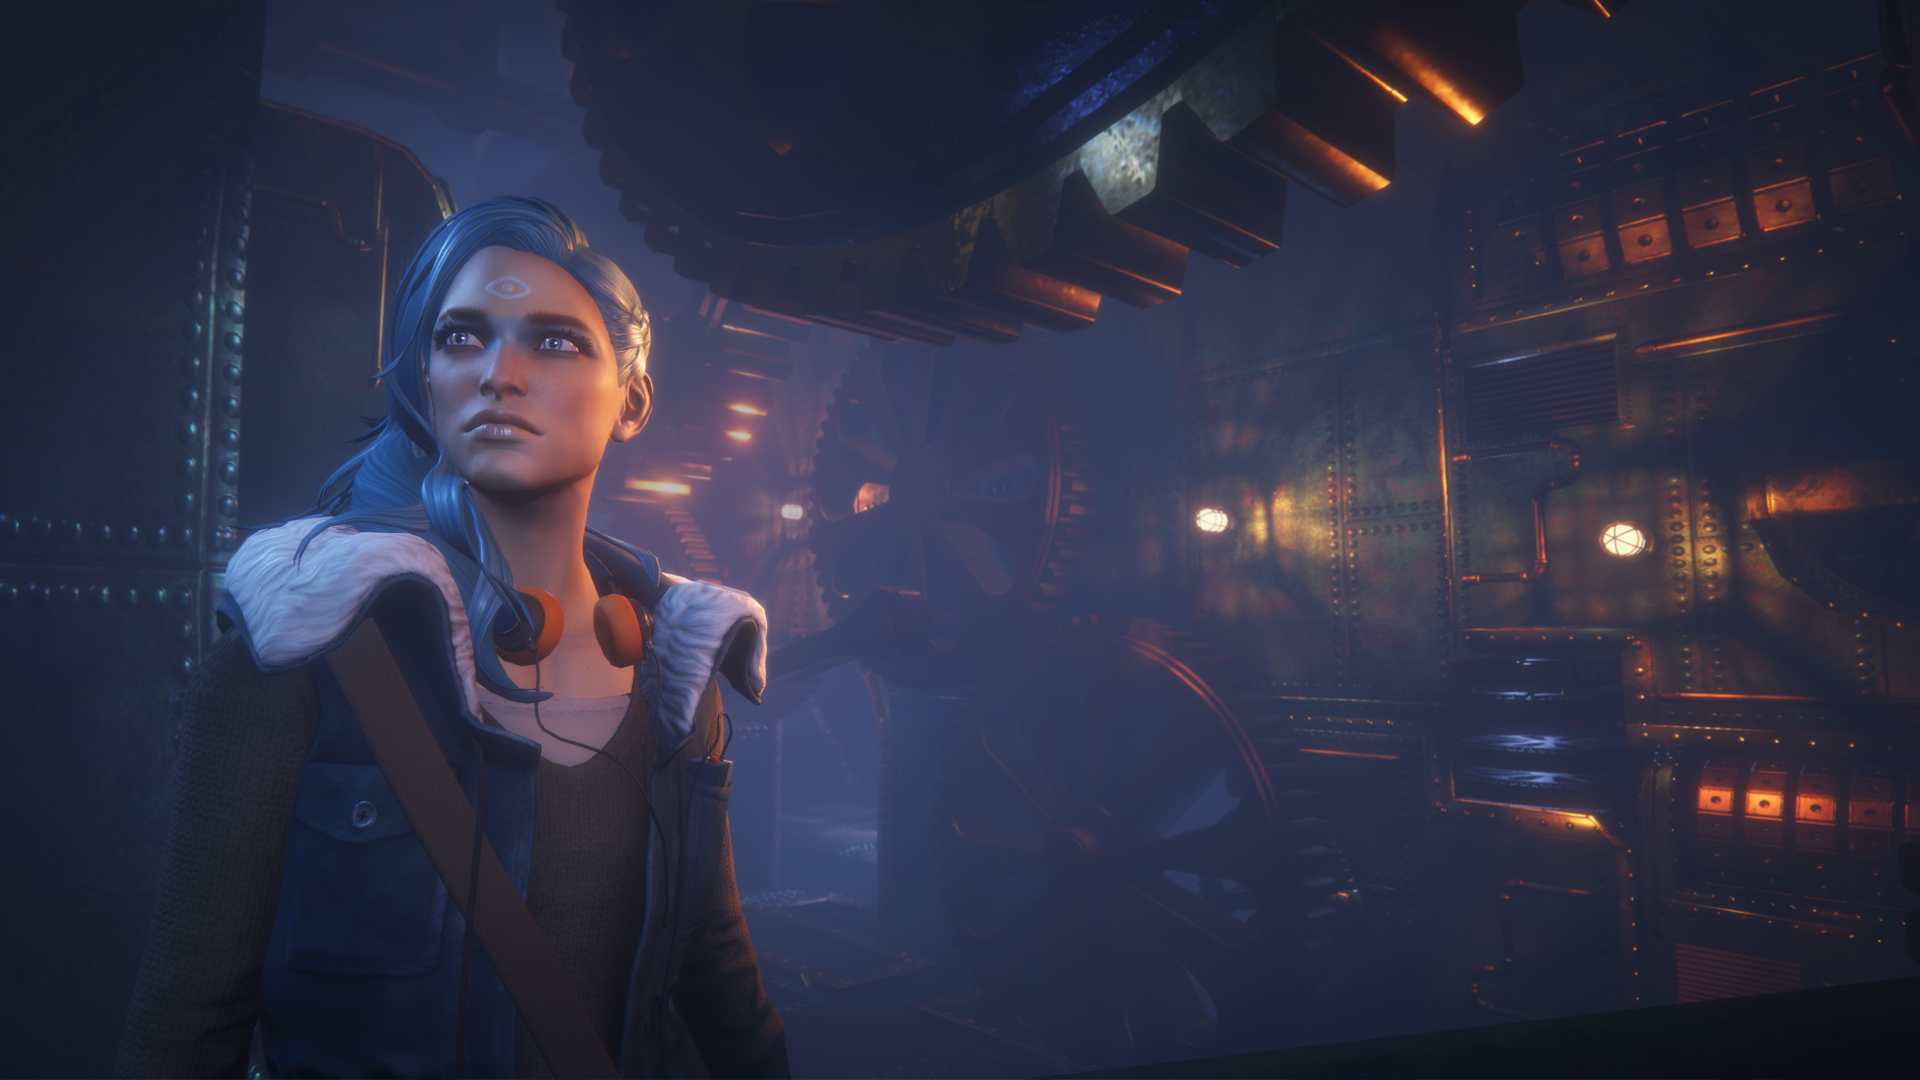 Steam Dreamfall Chapters